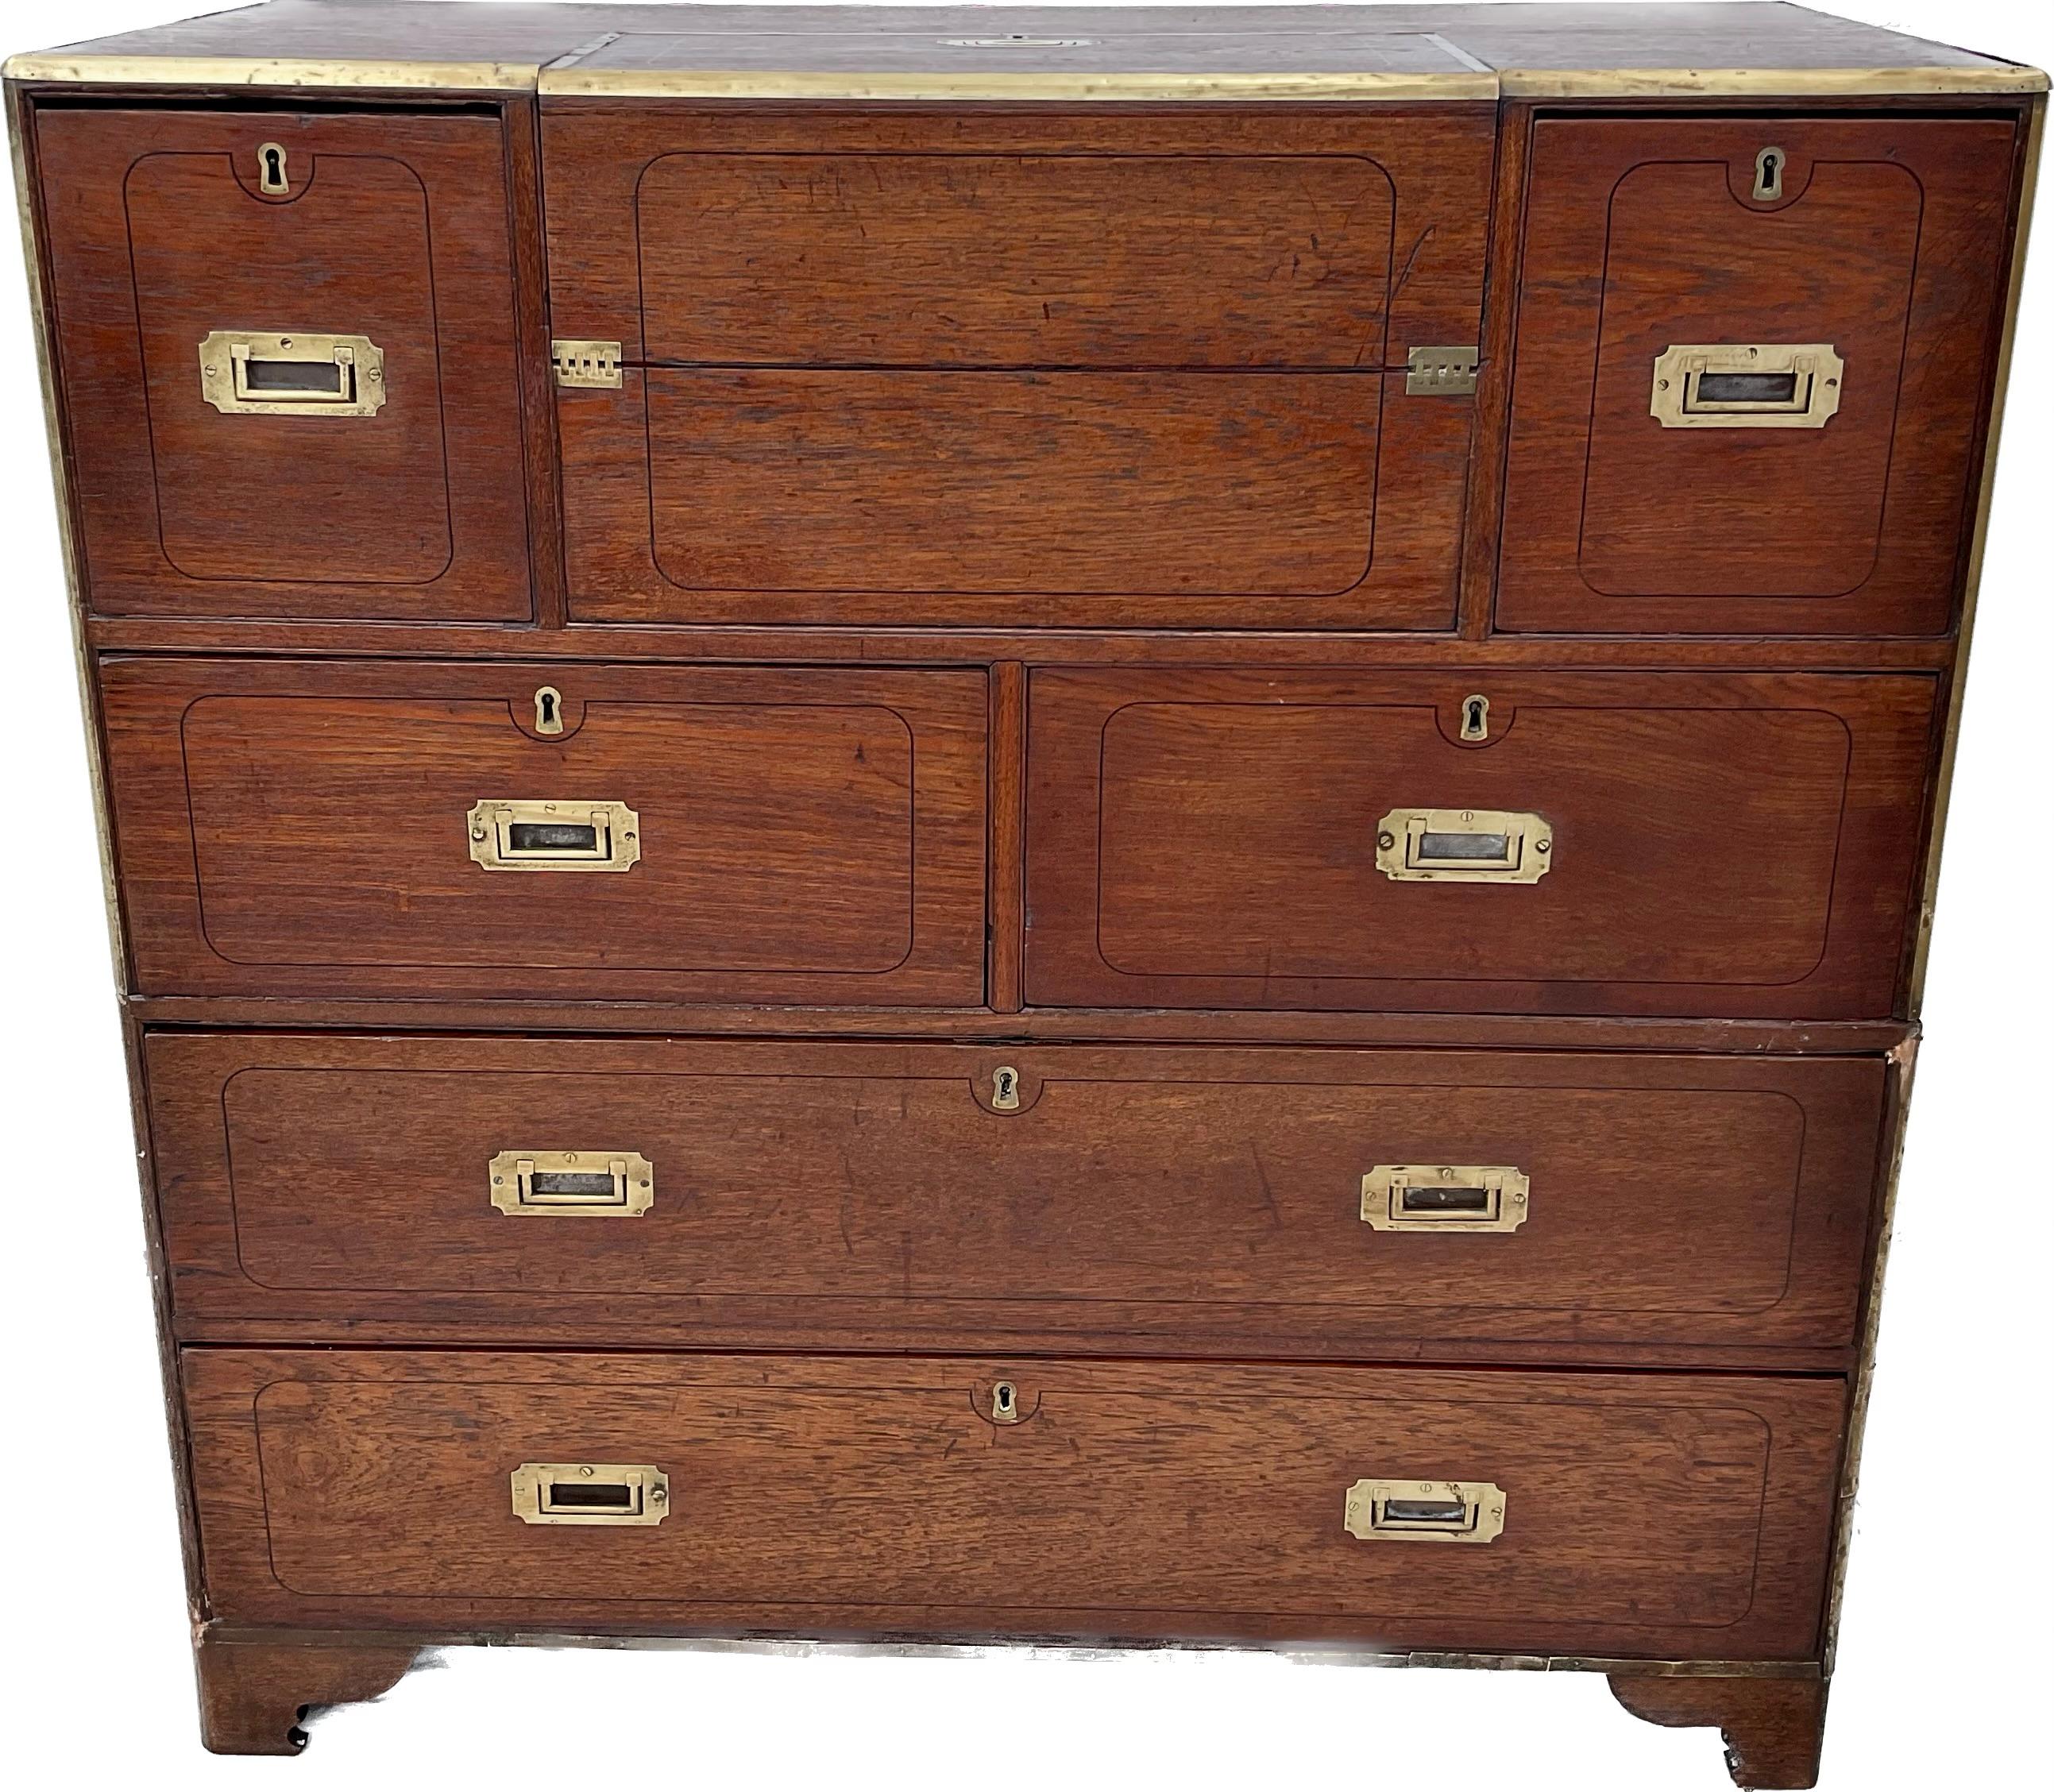 Spectacular English Campaign Chest - ship captain's desk / chest in two parts. The top central drawer contains a drop-front desk surface with multiple small drawers and secret compartments. Bottom of chest contains two large drawers. Brass mounts